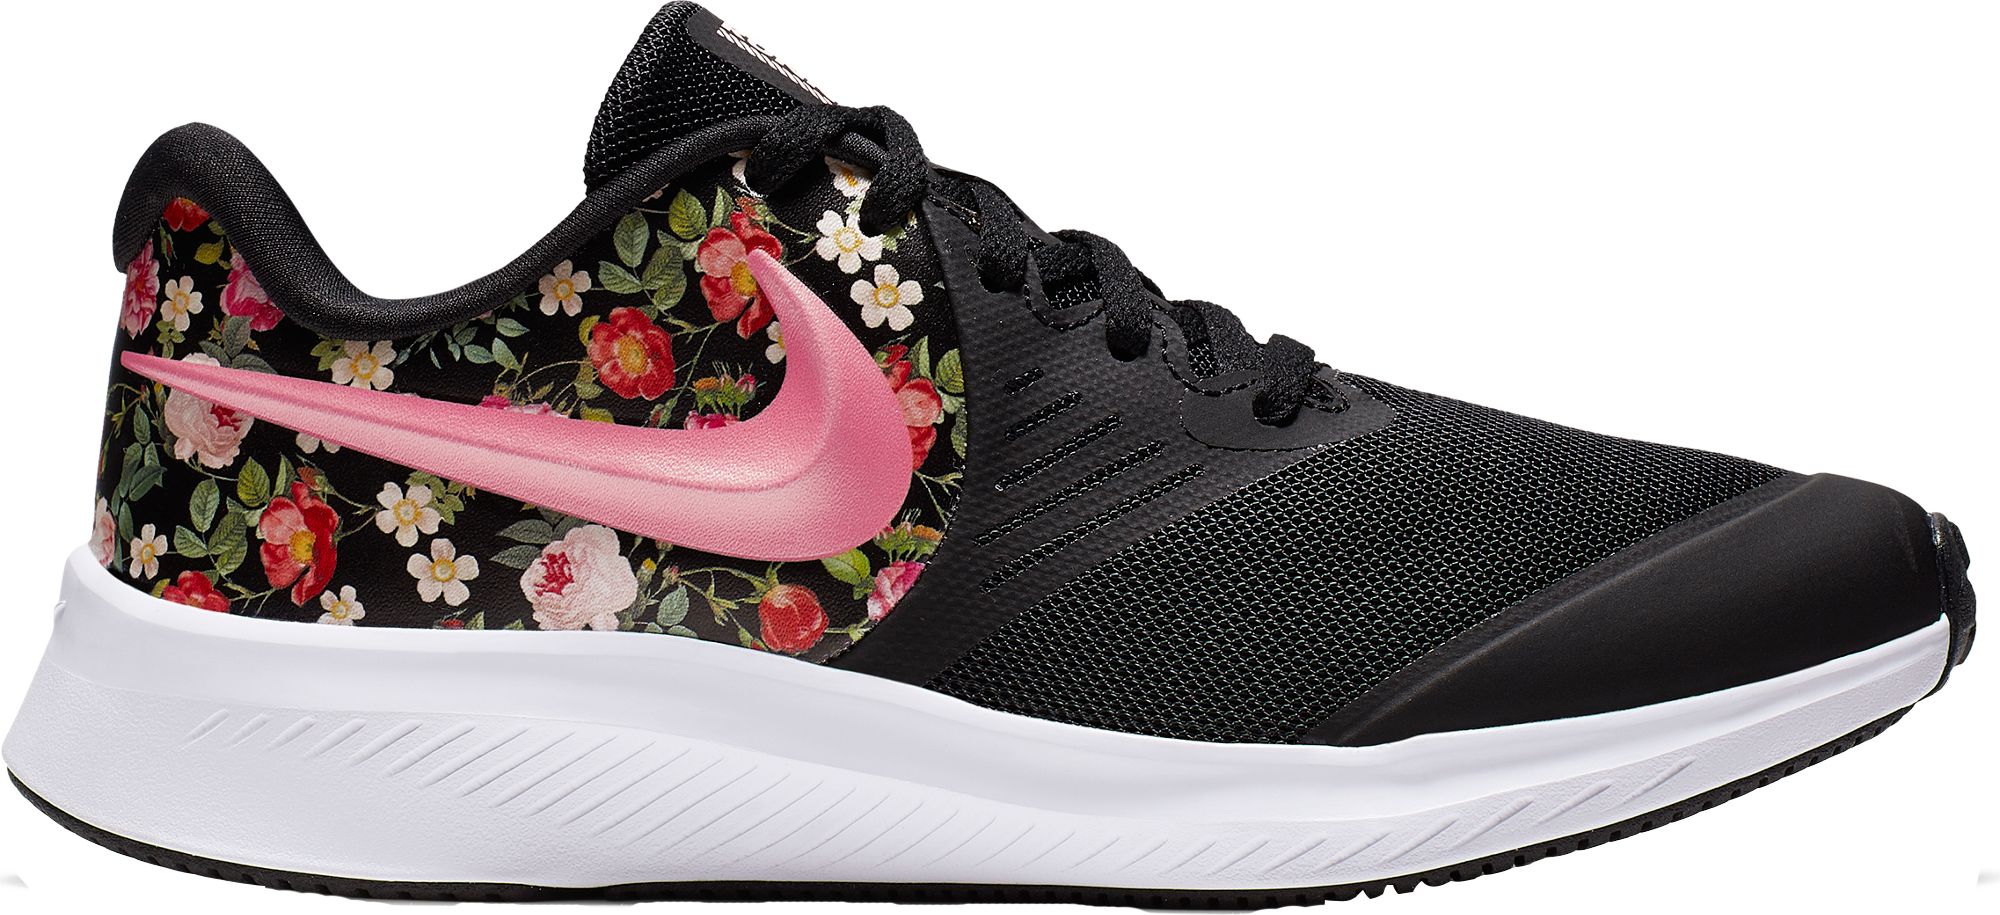 nike pink flower shoes